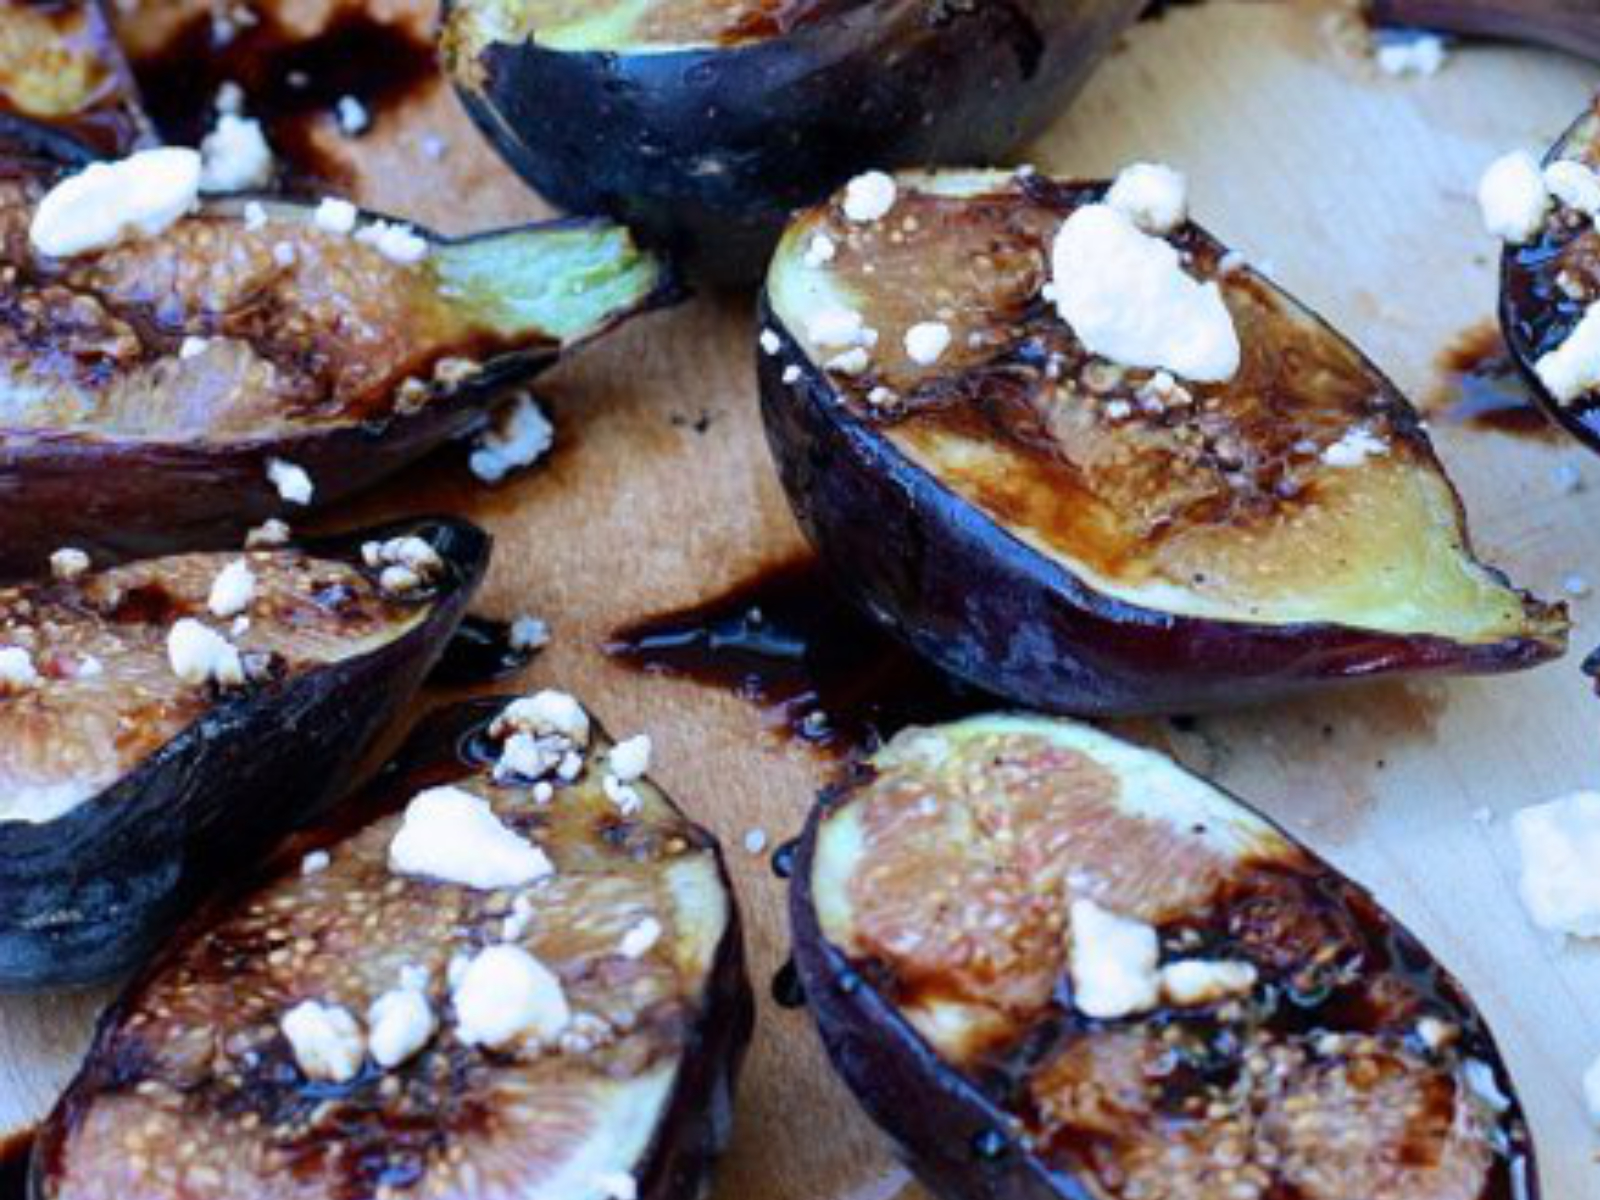 Grilled Figs with Balsamic Glaze and Goat Cheese